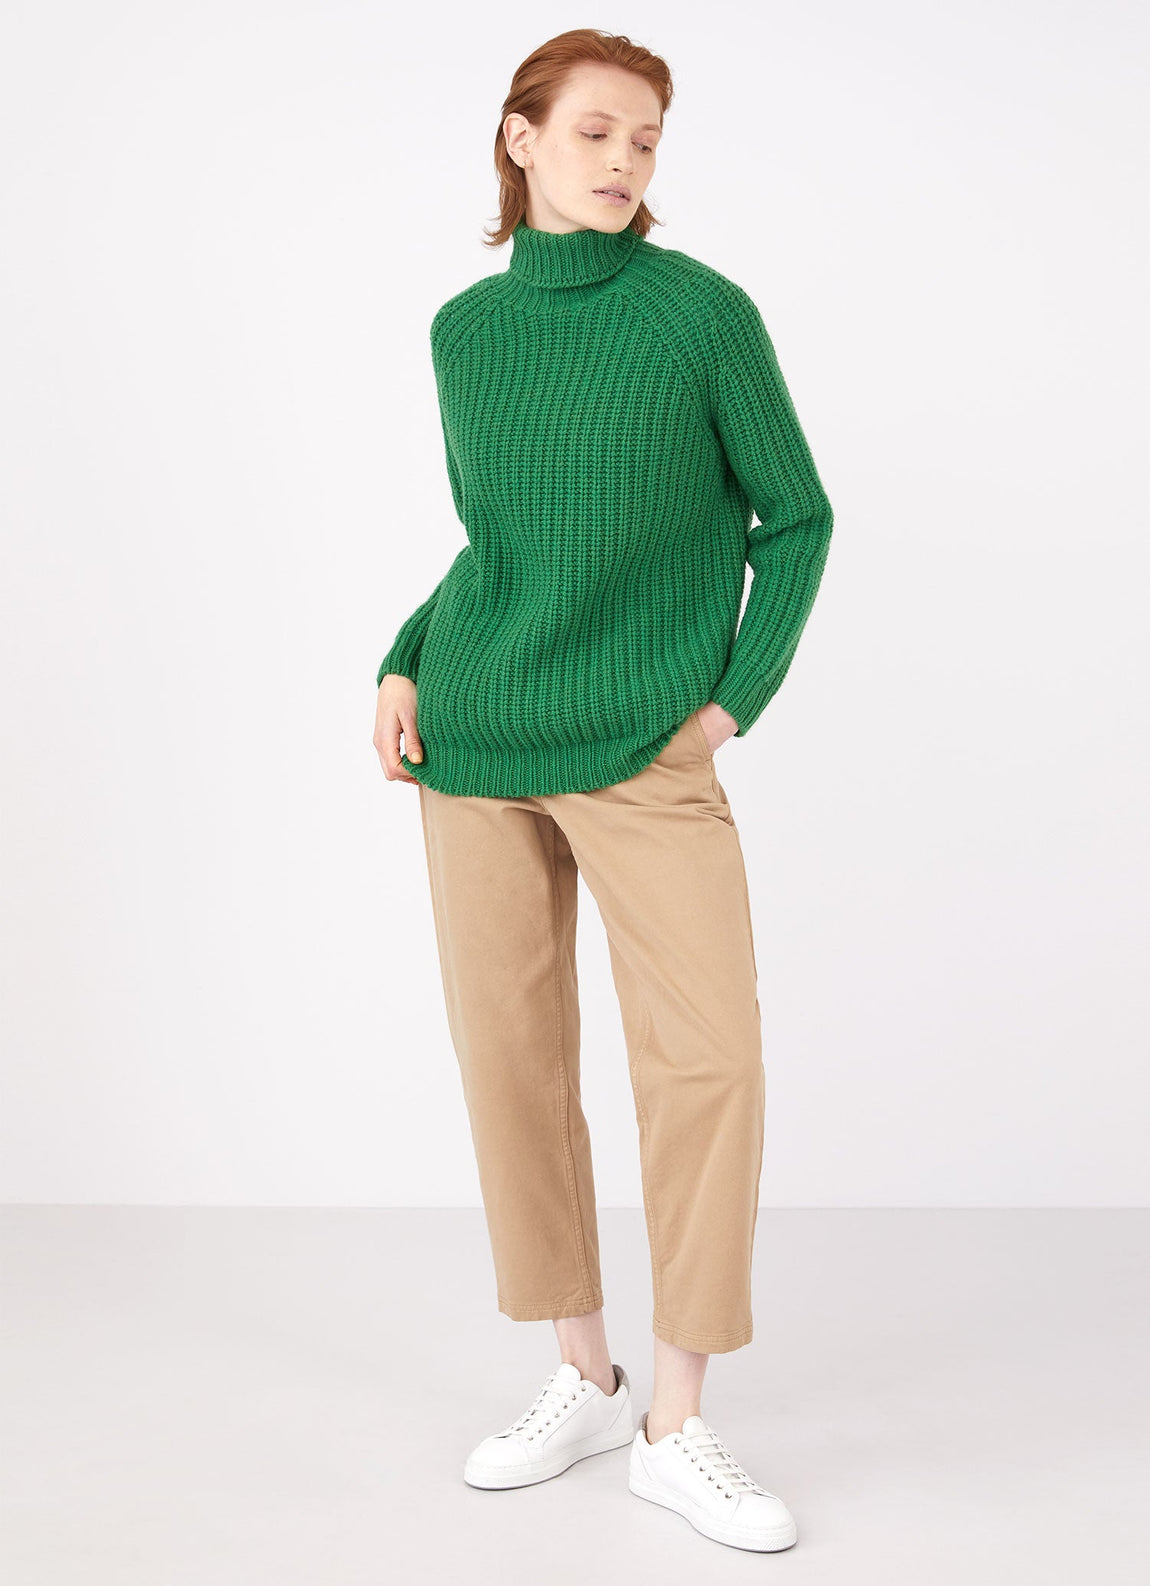 Women's Chunky Roll Neck Jumper in Bright Green